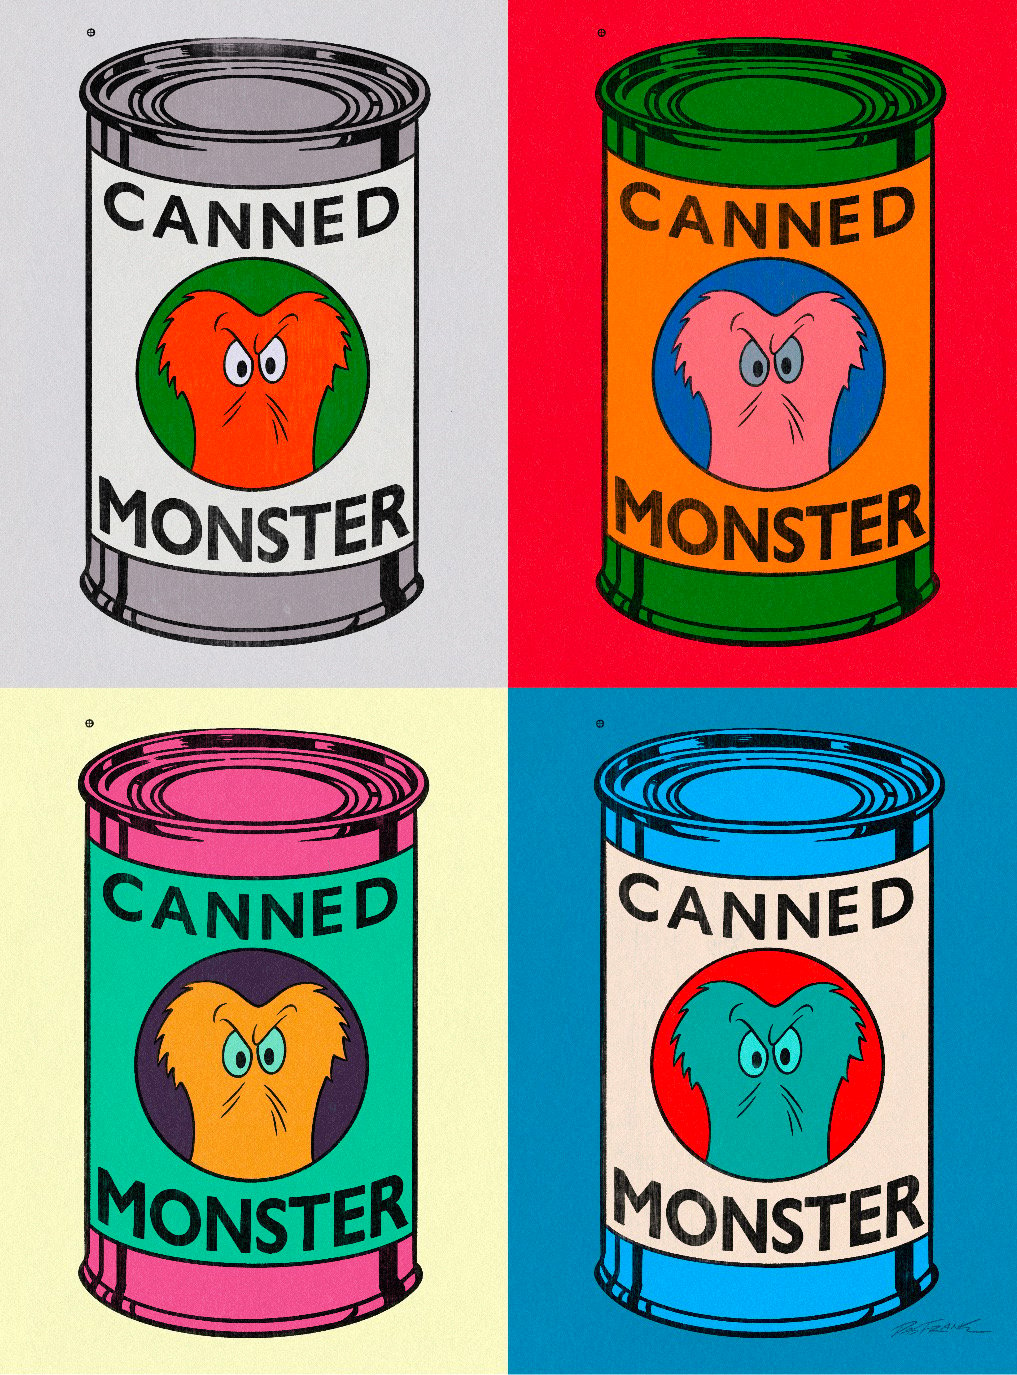 Canned Monster